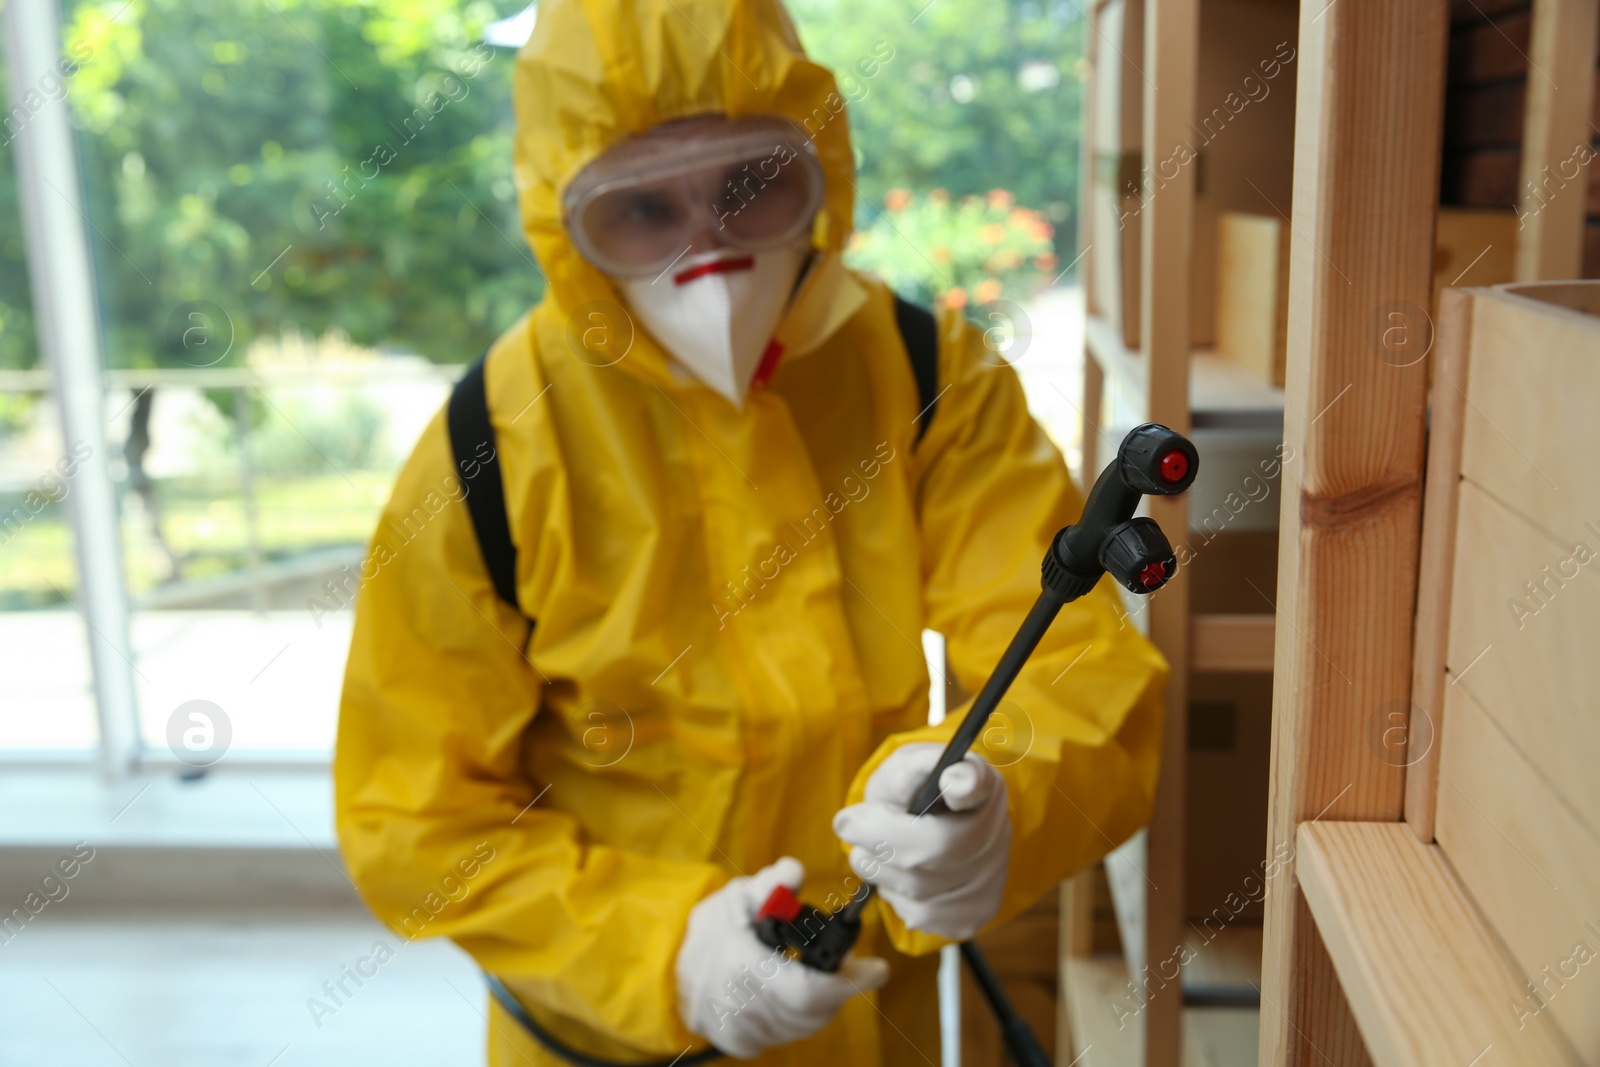 Photo of Pest control worker spraying pesticide indoors, focus on nozzle